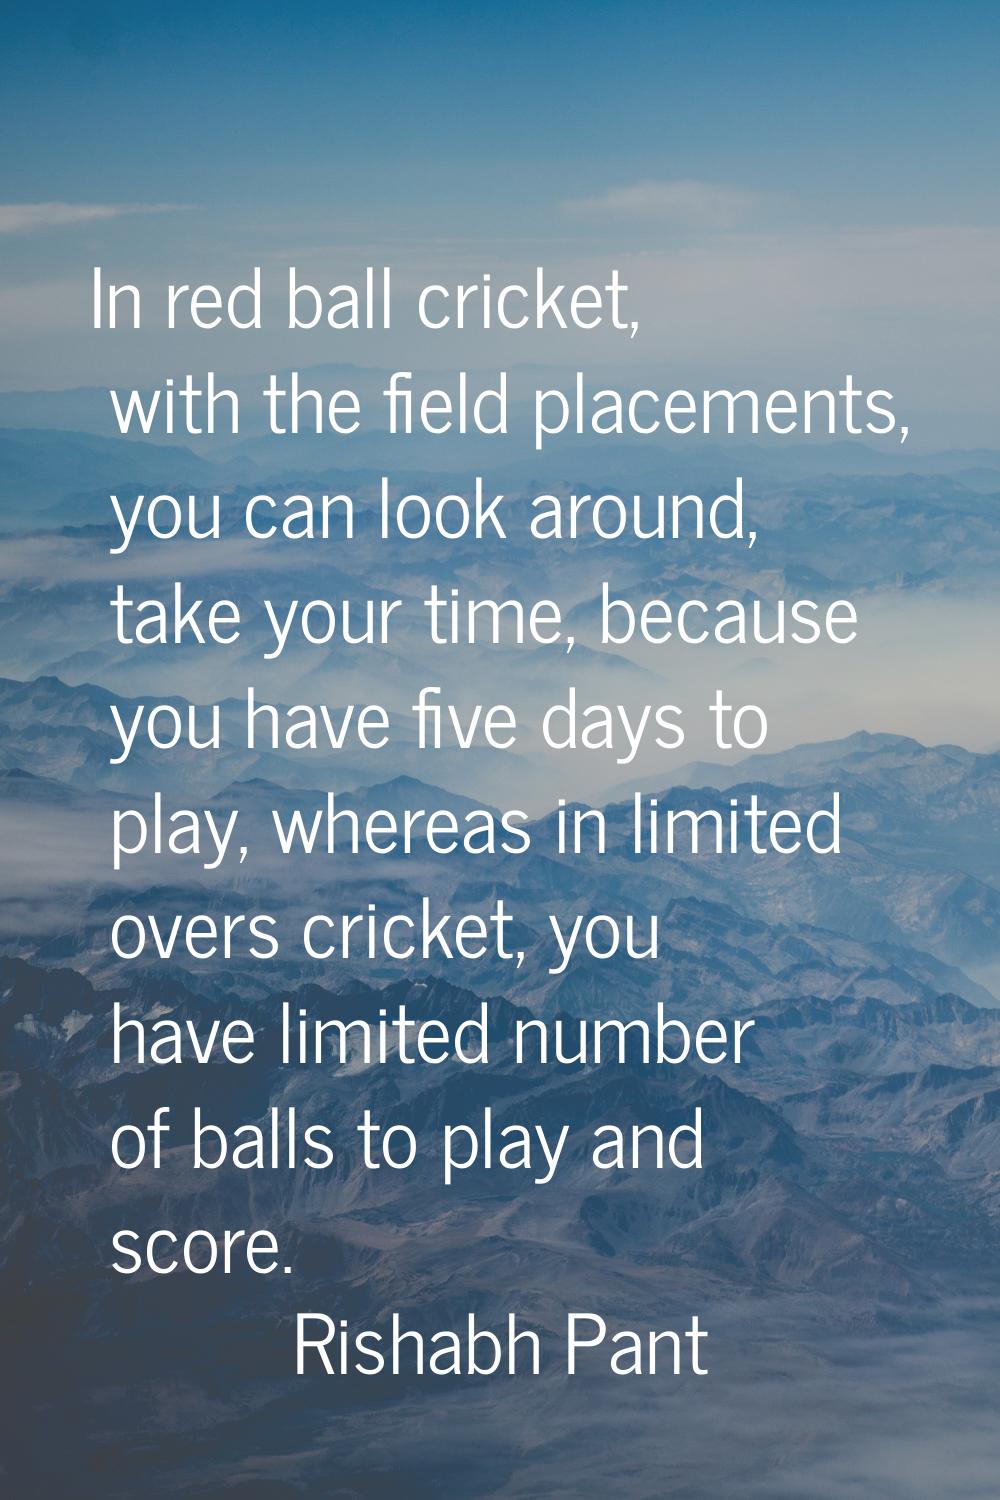 In red ball cricket, with the field placements, you can look around, take your time, because you ha